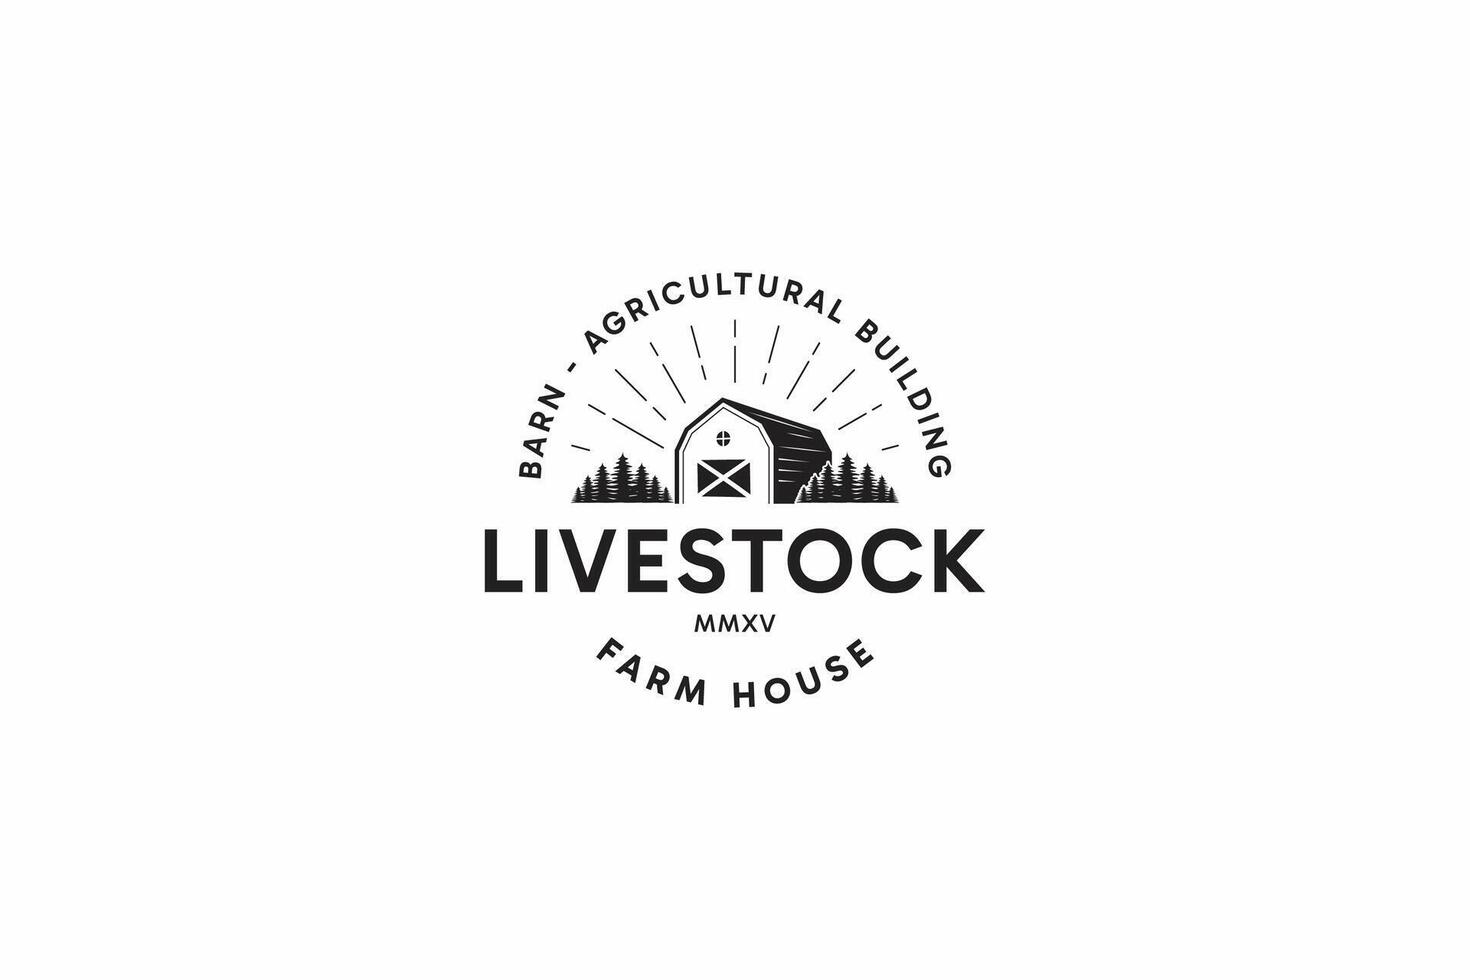 Livestock Barn Agricultural Farm House Forest Rural Countryside Silhouette Village Building Abstract Illustration Badge Logo vector